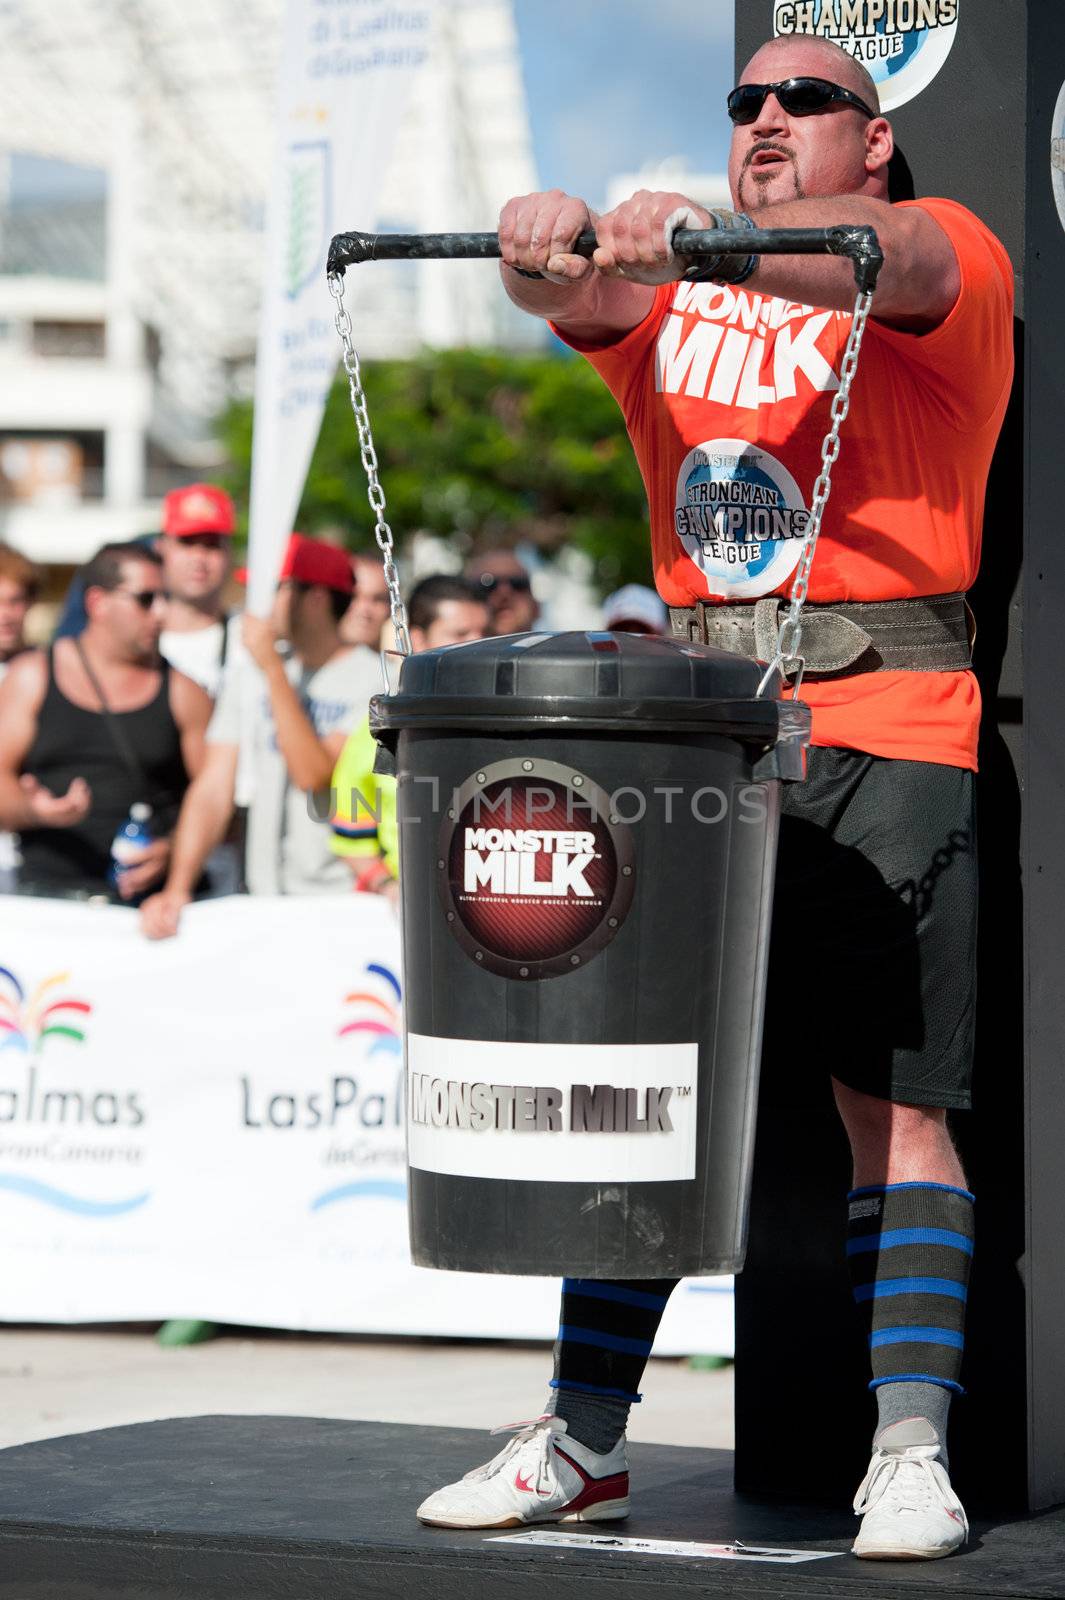 CANARY ISLANDS - SEPTEMBER 03: Ervin Katona from Serbia lifting a heavy trash can for longest possible time during Strongman Champions League in Las Palmas September 03, 2011 in Canary Islands, Spain